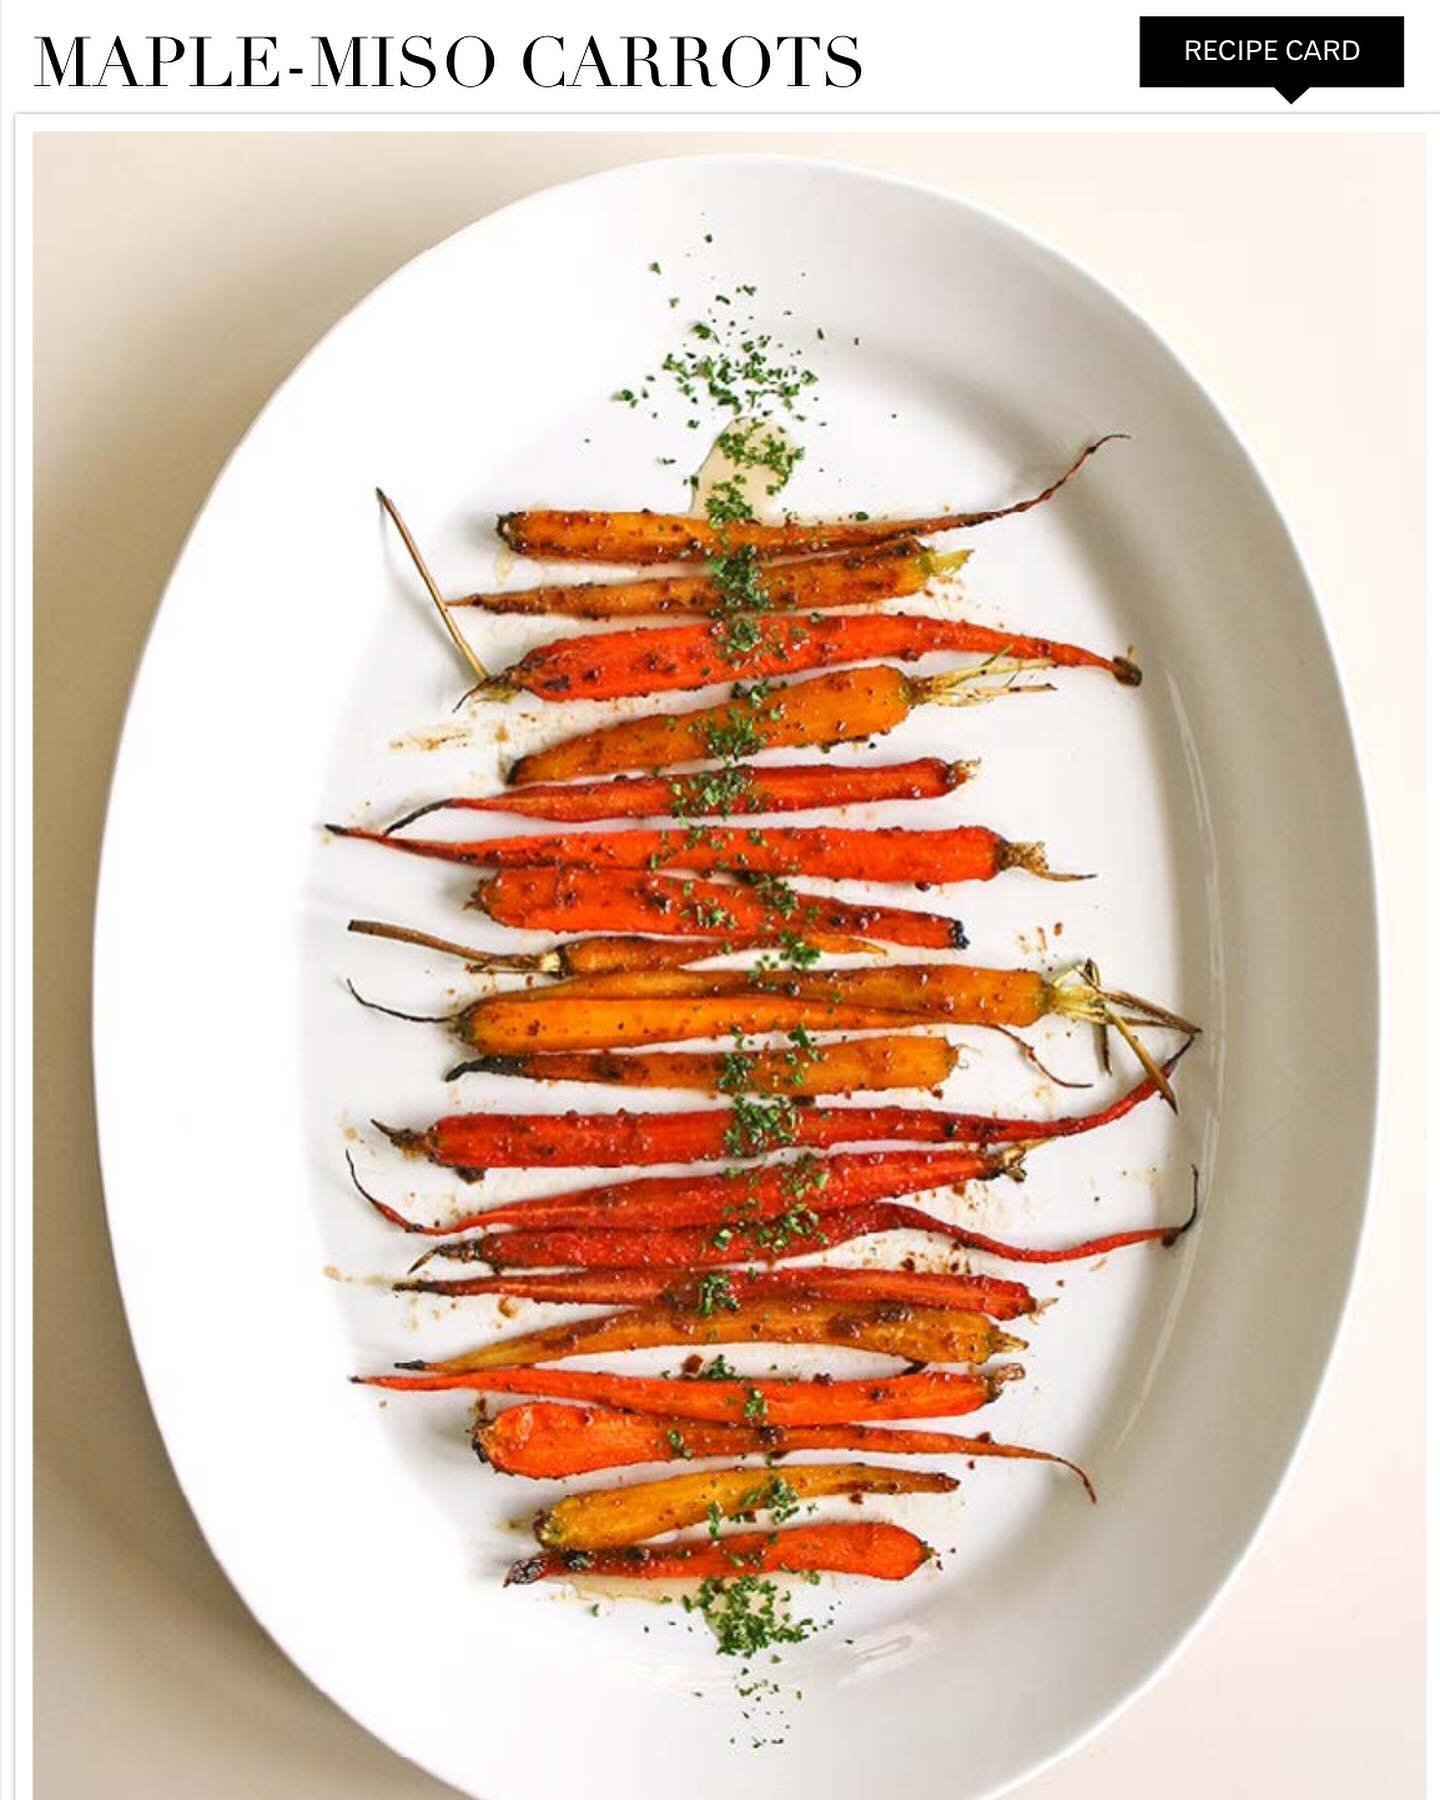 BEAUTIFUL FOOD BY DESIGN | MAPLE-MISO CARROTS | Picked up Sweet little gems at Farmers Market roasted with miso &amp; maple - sweet &amp; savory. 
A favorite From the Garden

TAP BIO FOR FROM THE GARDEN
https://bijouxs.com/cookbook-2/from-the-garden/